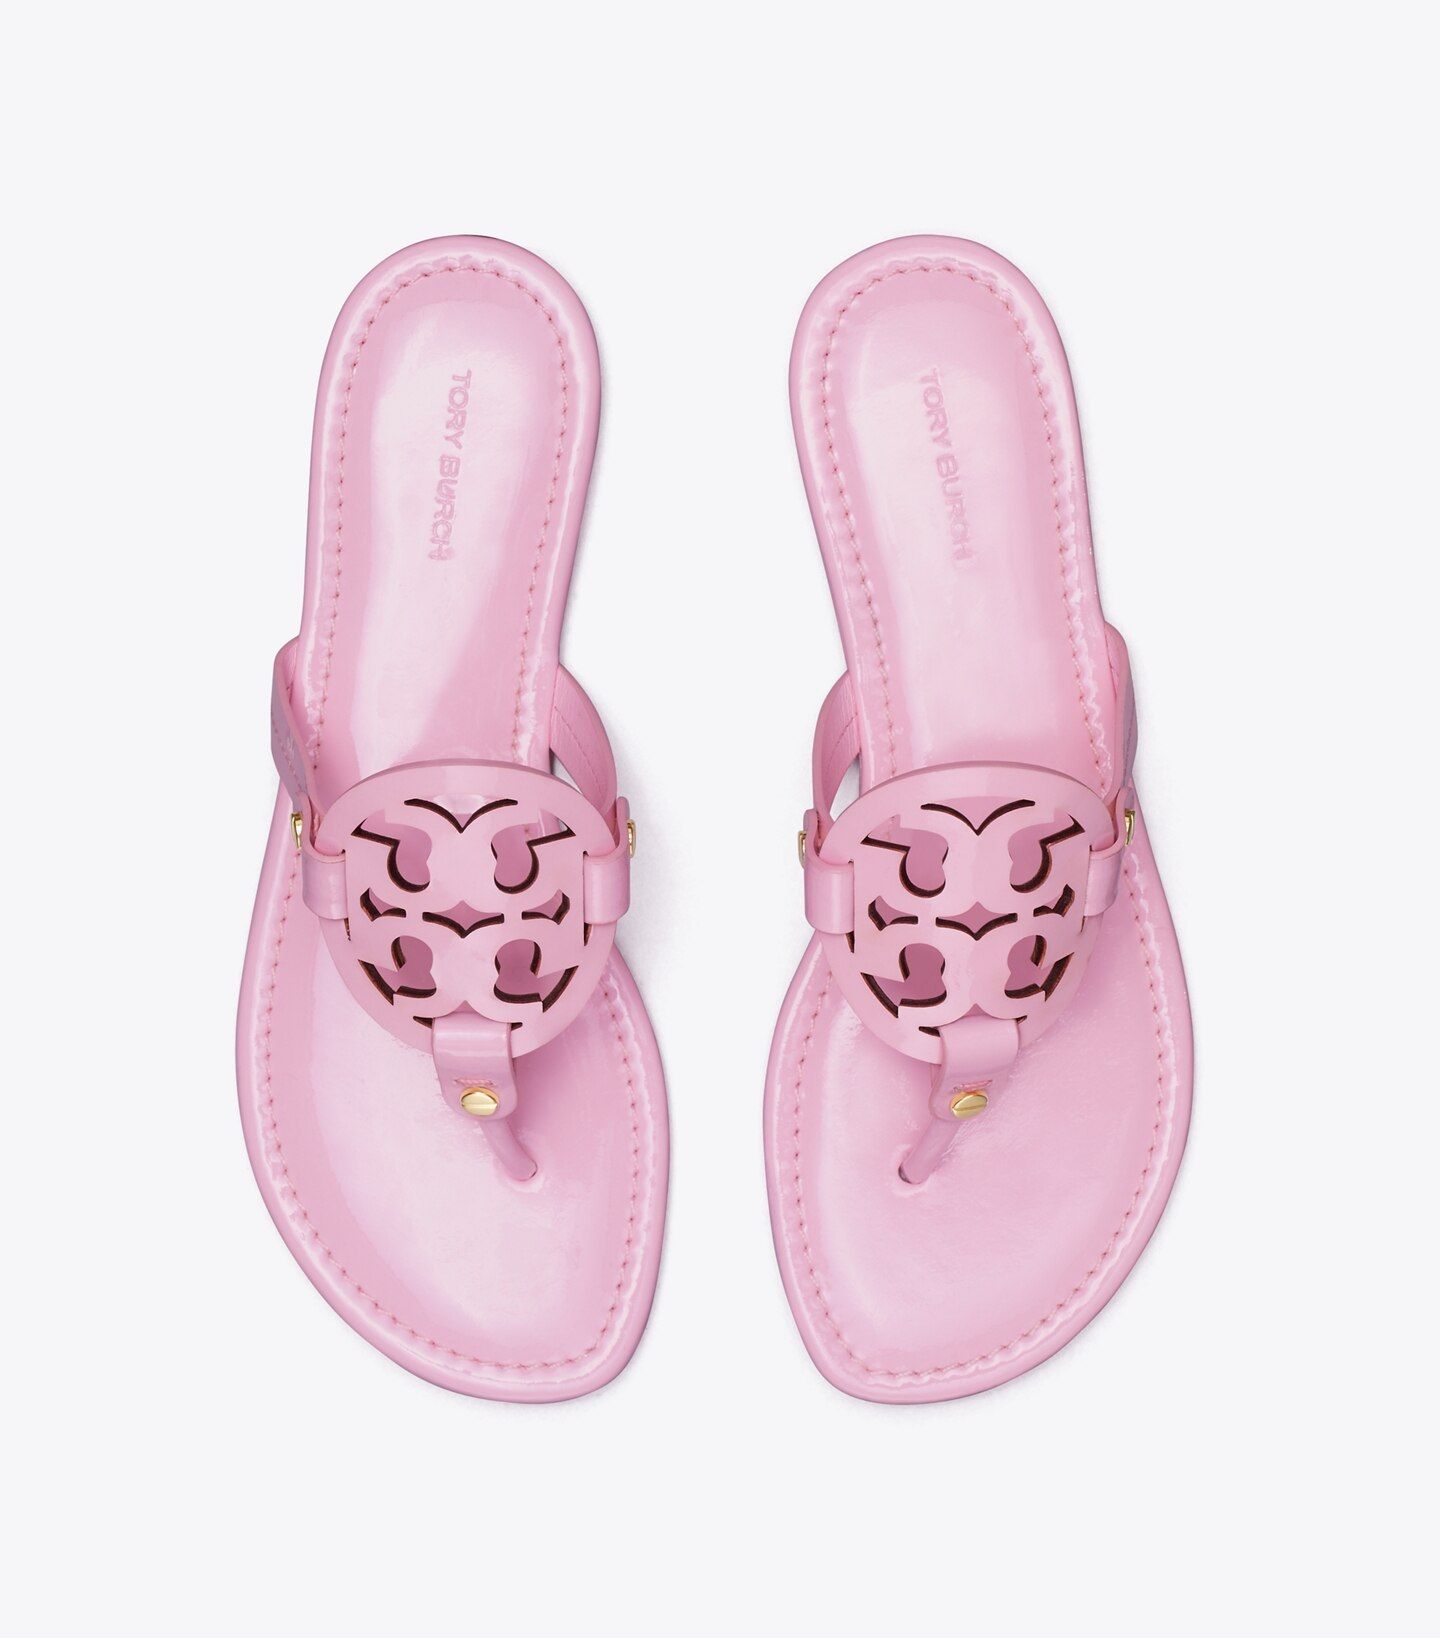 MILLER PATENT LEATHER SANDAL | Tory Burch (US)